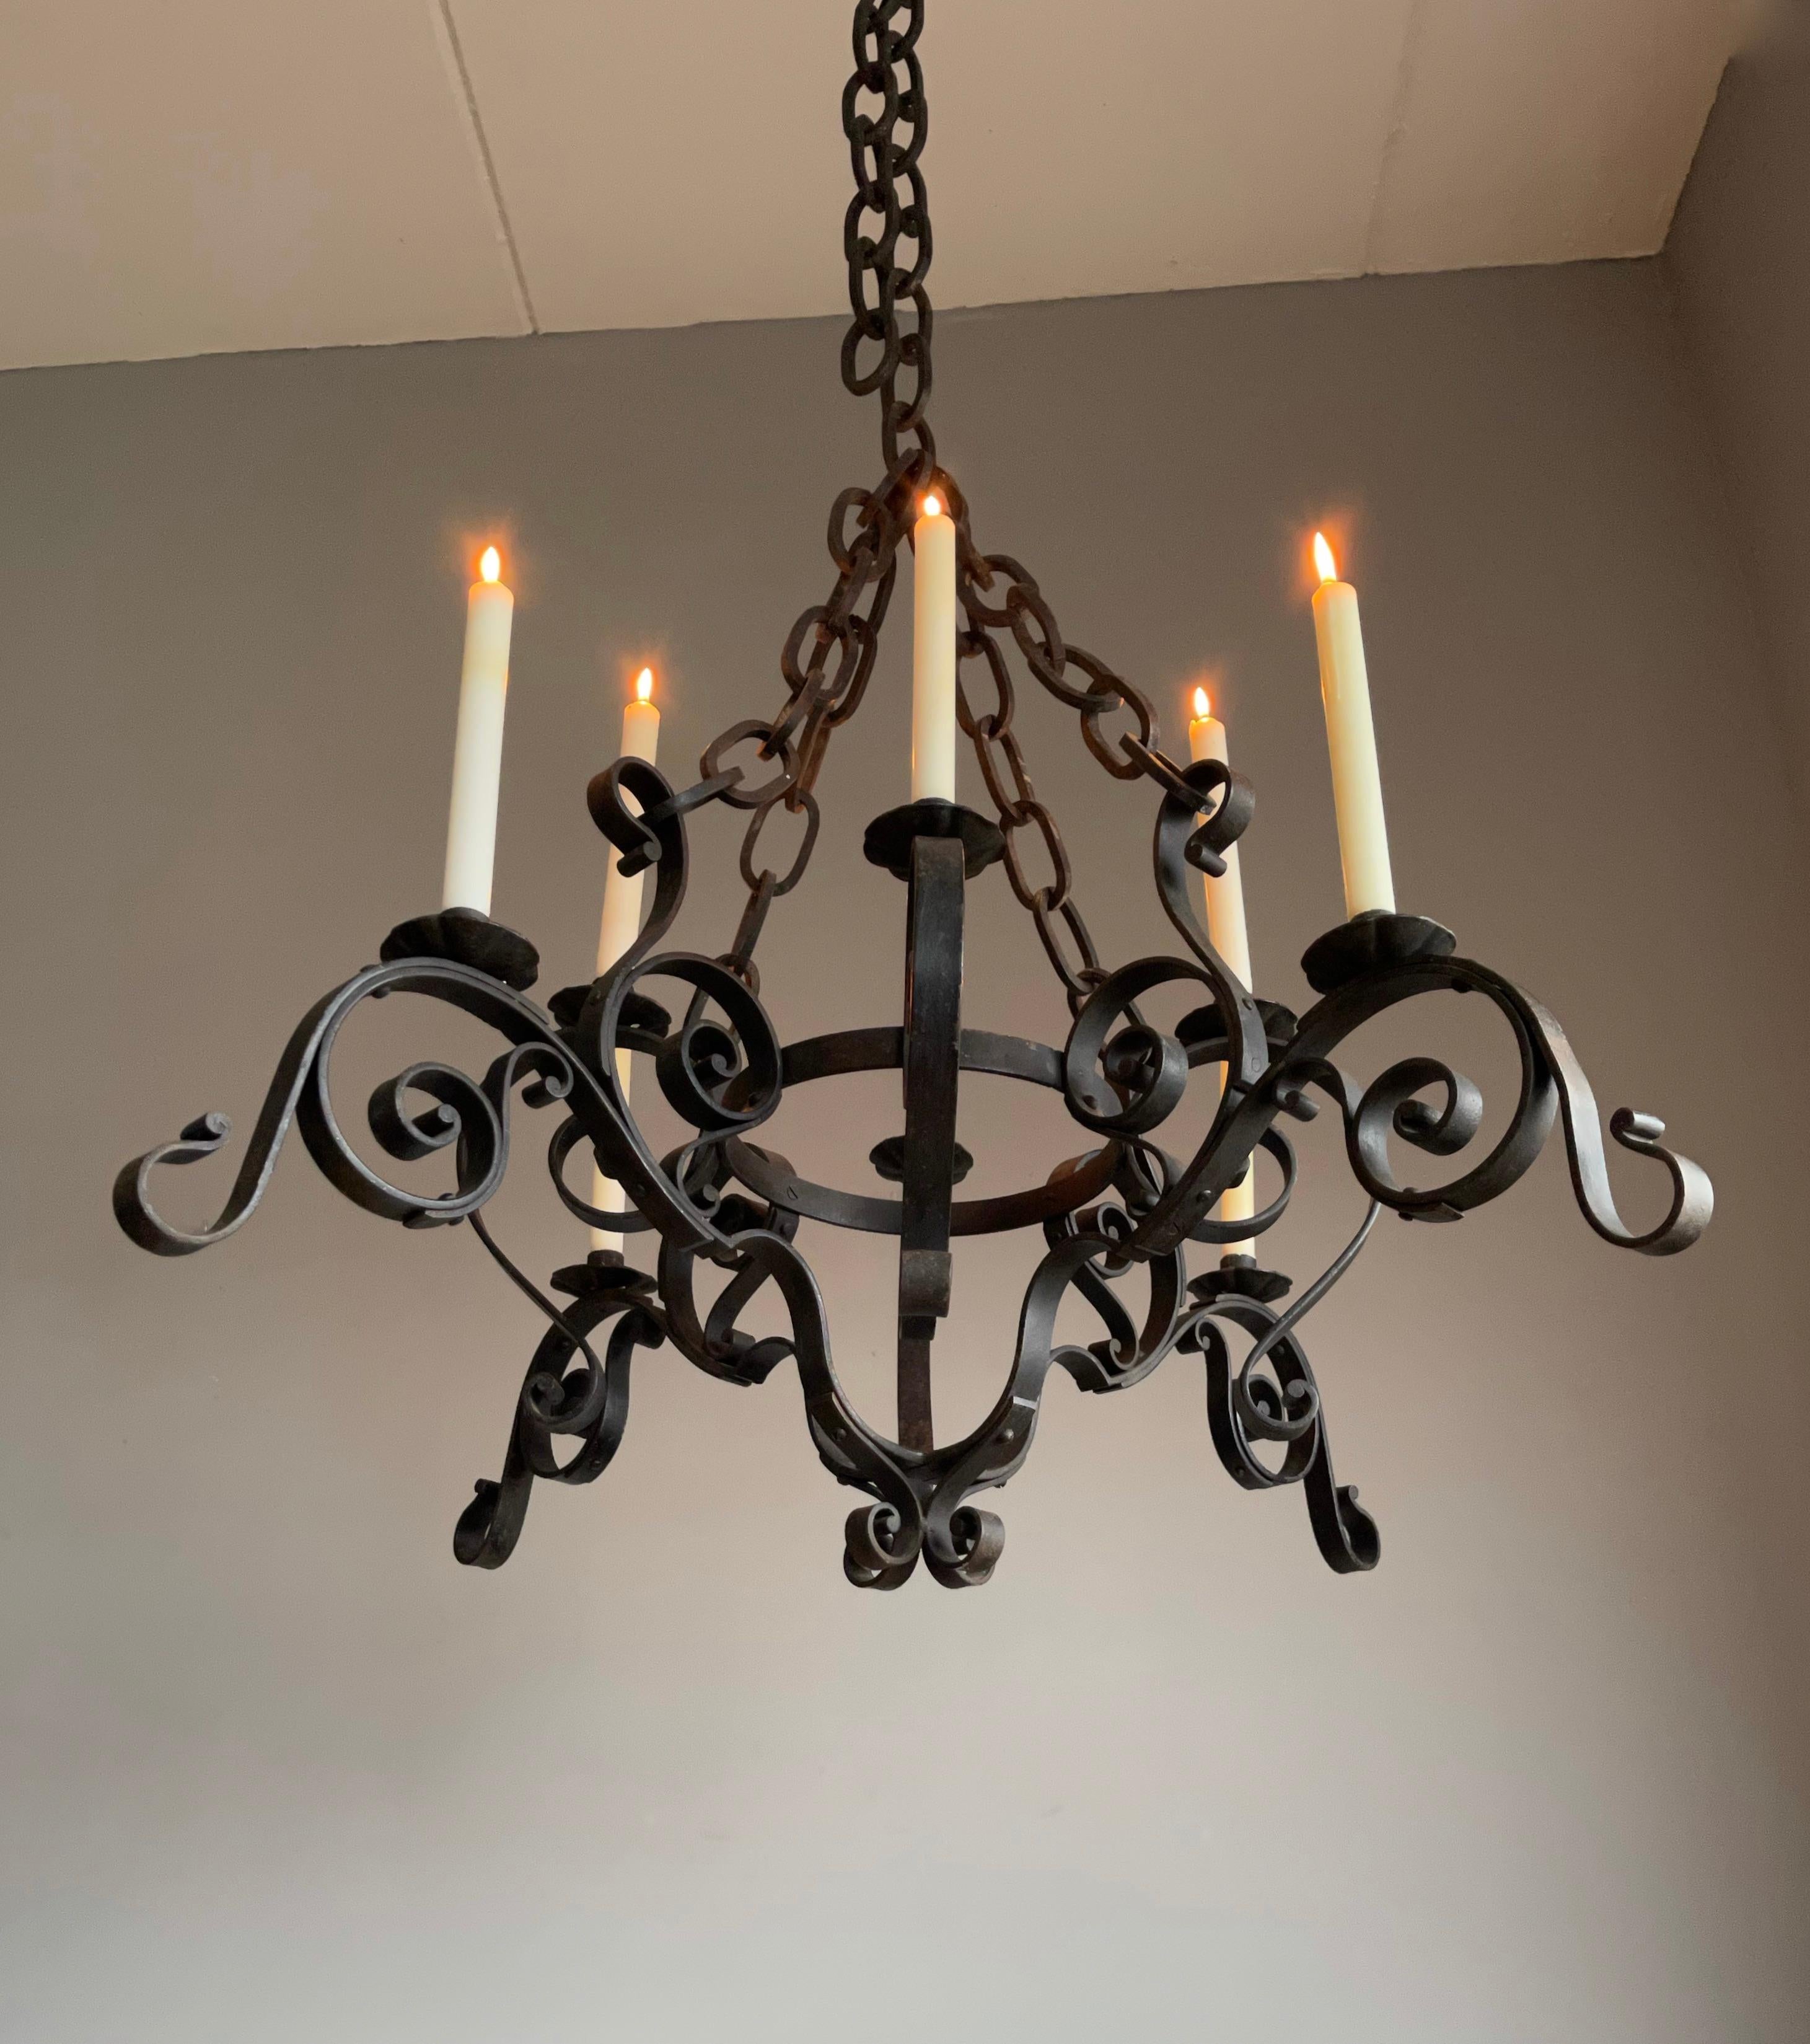 ornate iron candle chandeliers